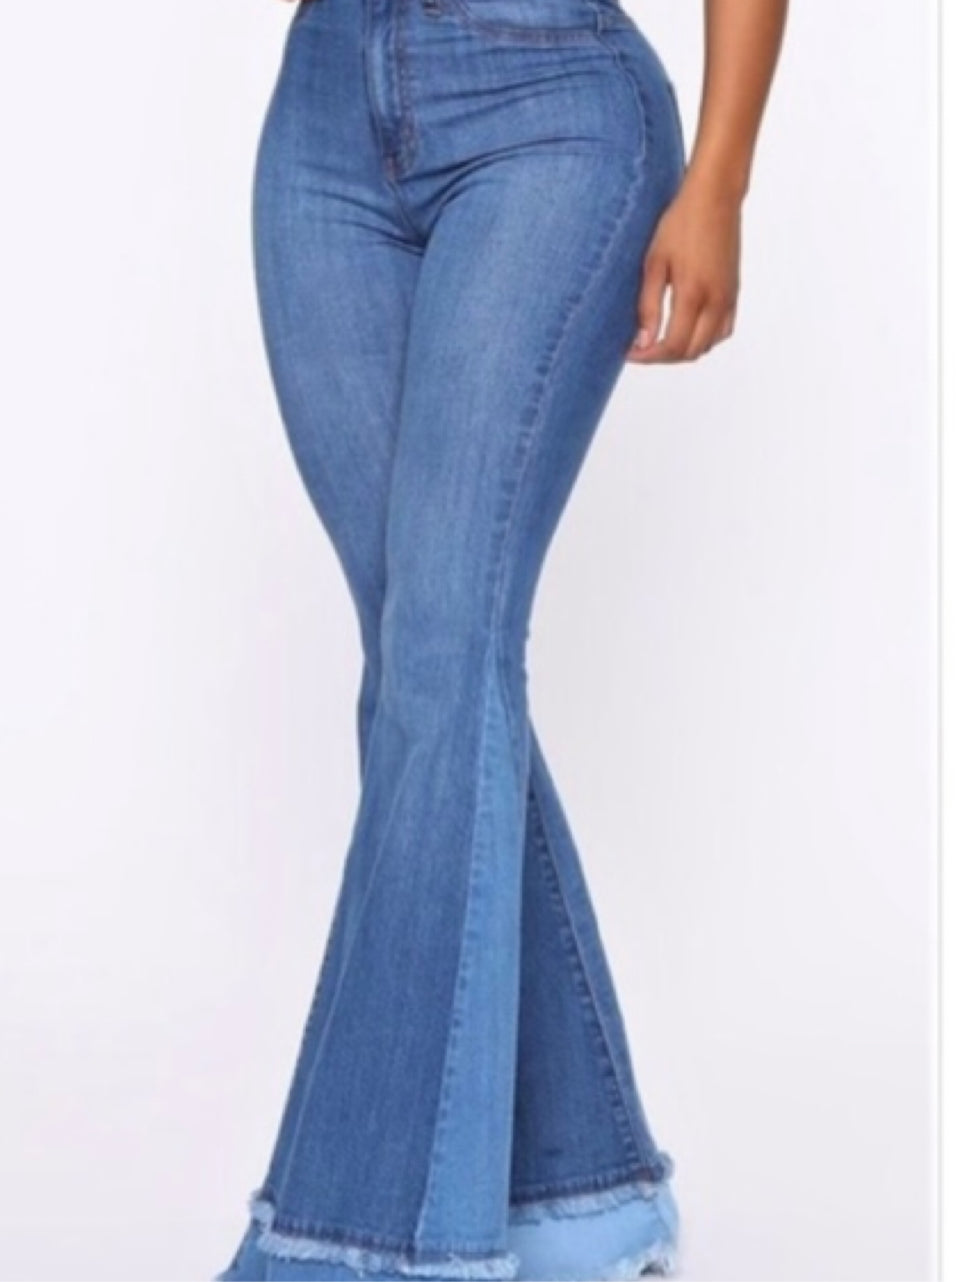 Rock The Bell Jeans